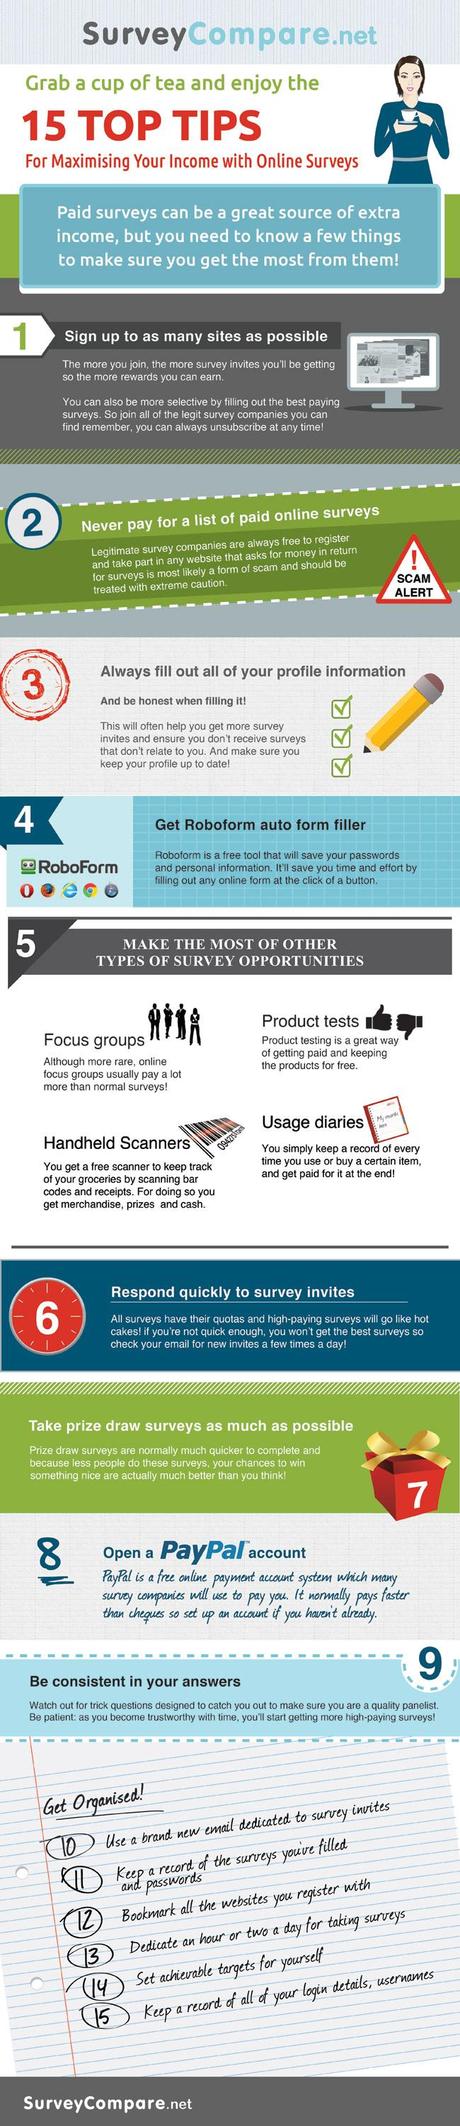 How To Maximize Your Income With Paid Surveys Infographic